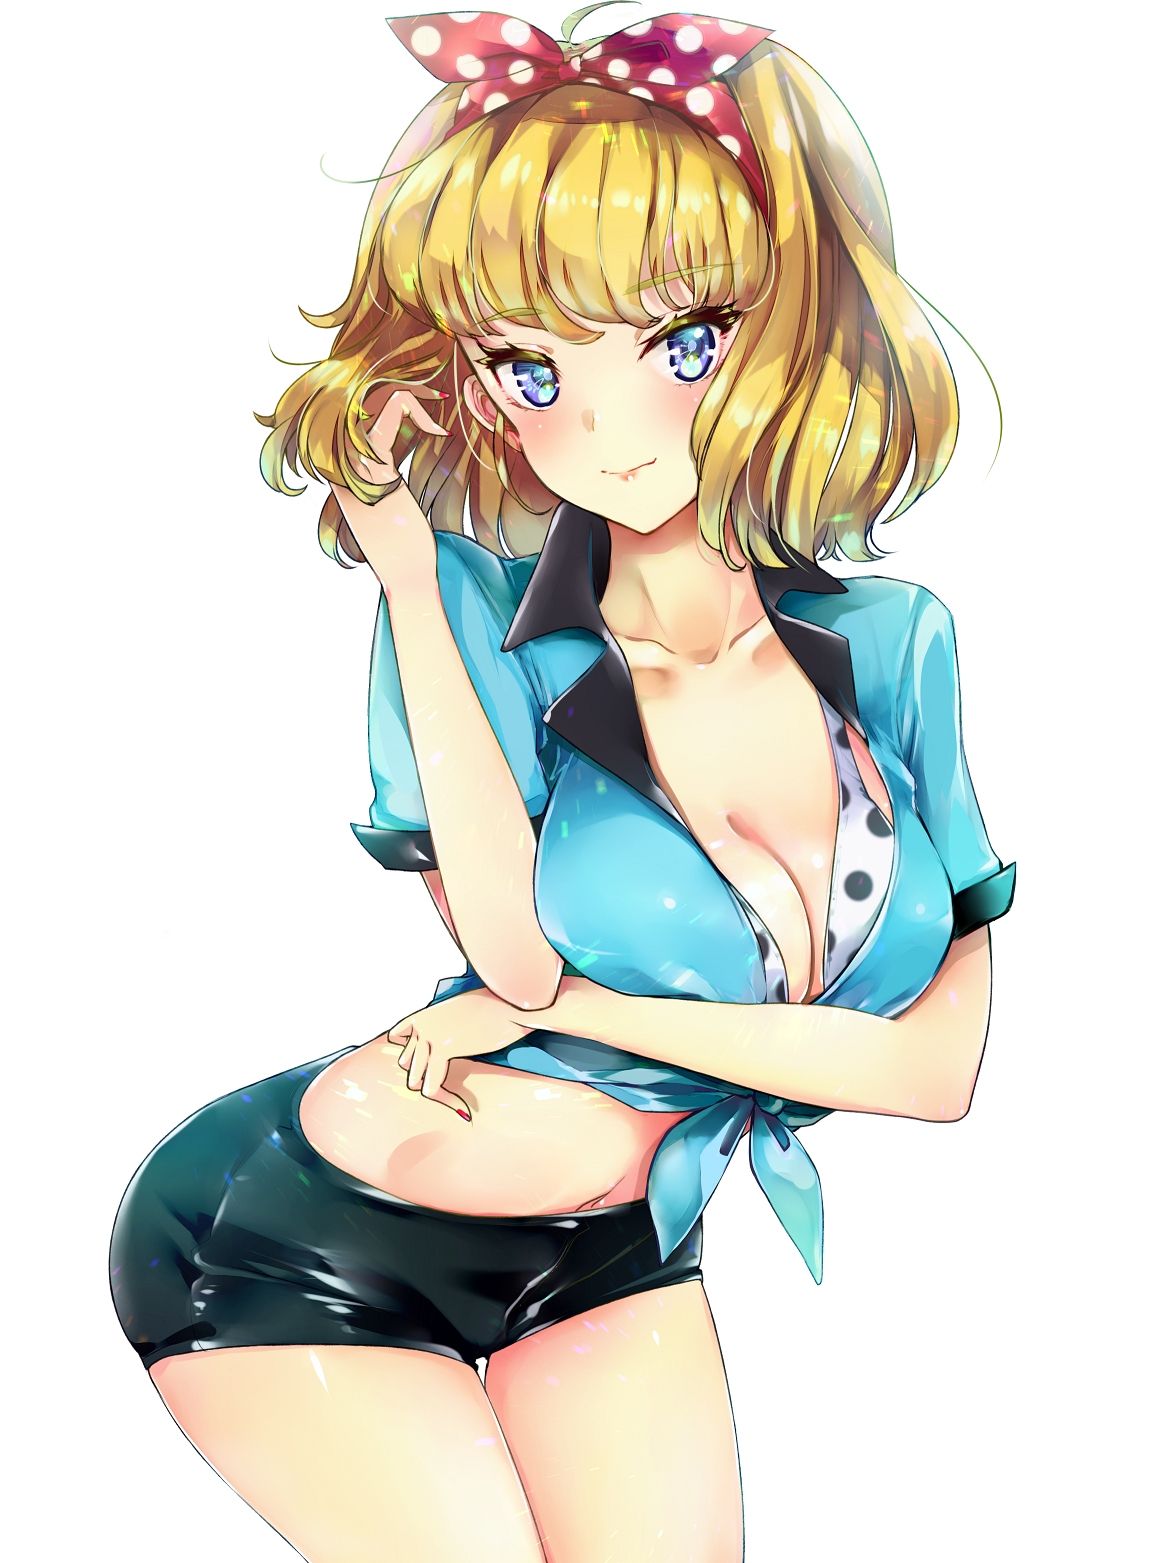 Erotic anime summary Erotic image collection of the valley that seems to smell good [50 sheets] 24